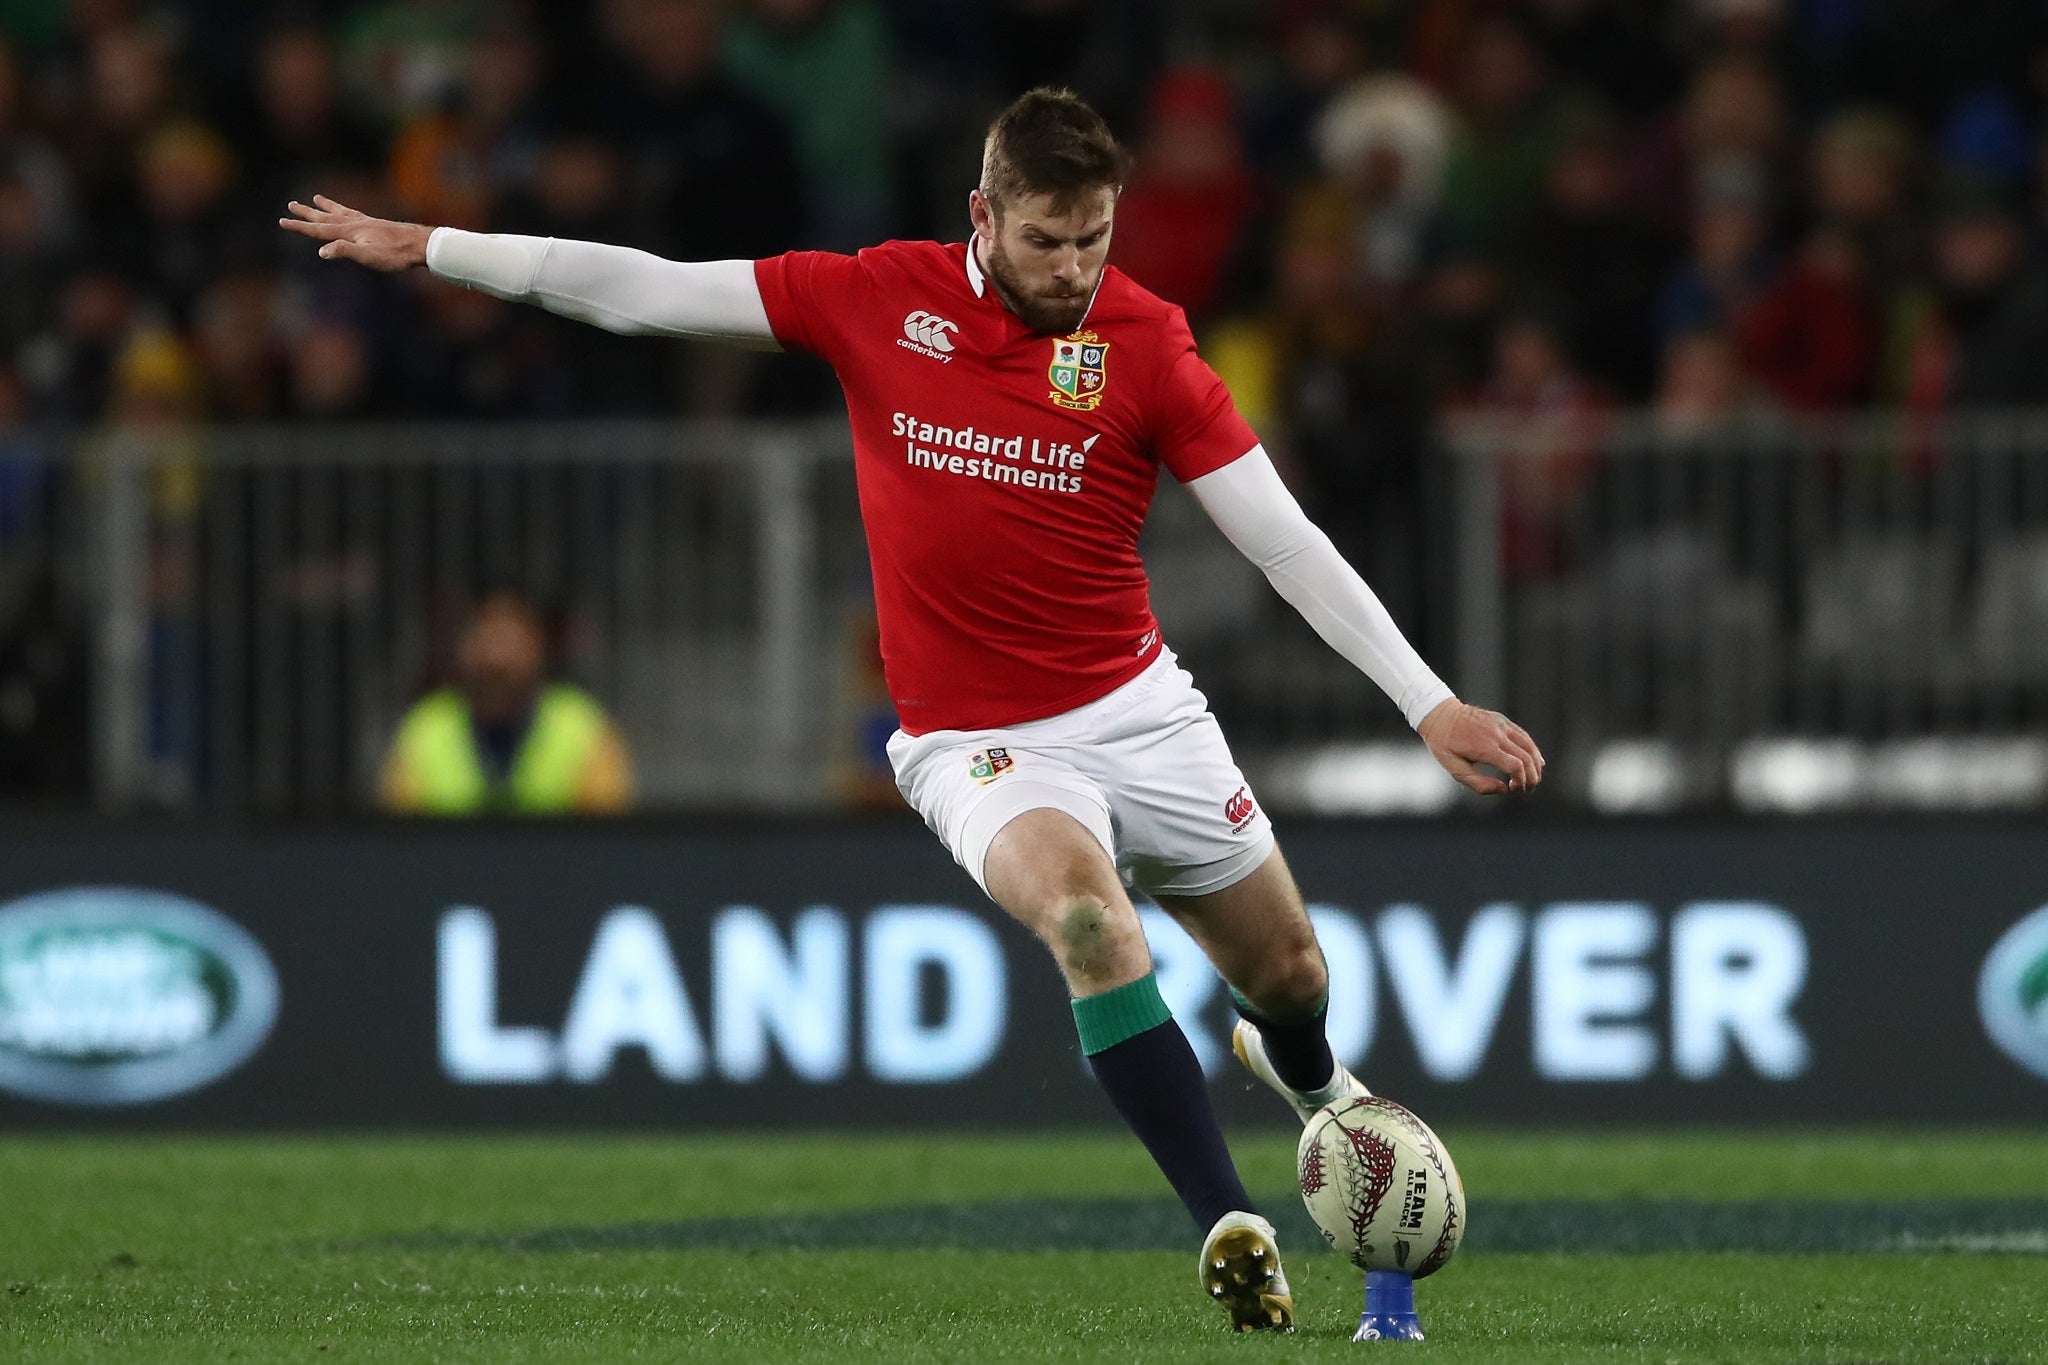 Elliot Daly has the confidence to step up if the Lions need him to kick at goal in the final minute of the third Test